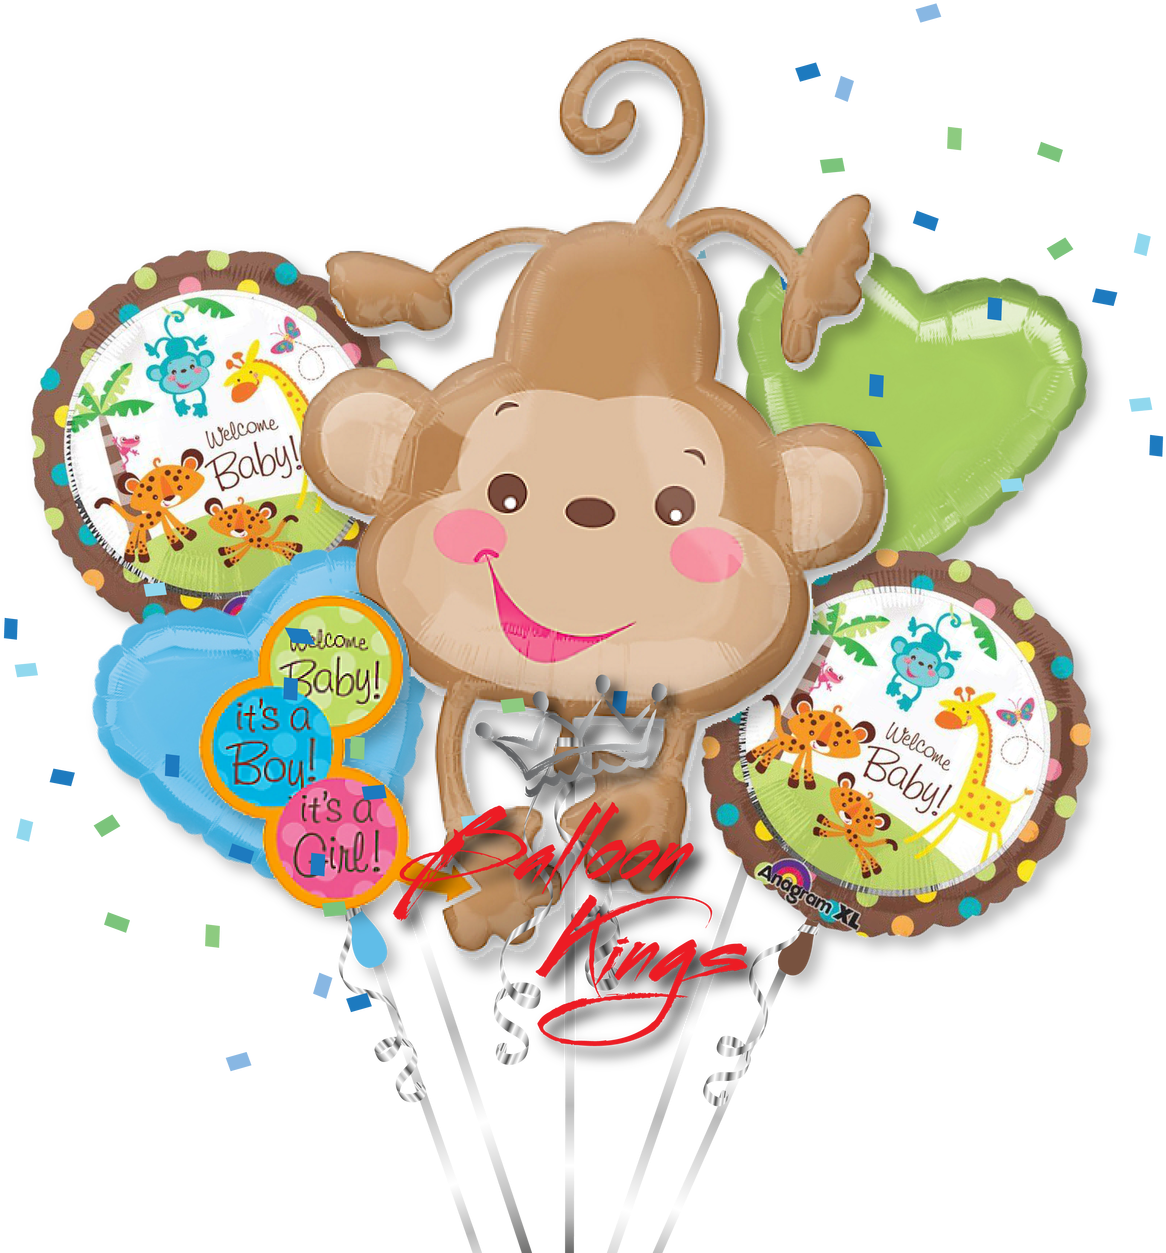 Baby Shower Fisher Price Bouquet - Fisher Price Zoo Jungle Welcome Baby Shower Safari (1280x1280)